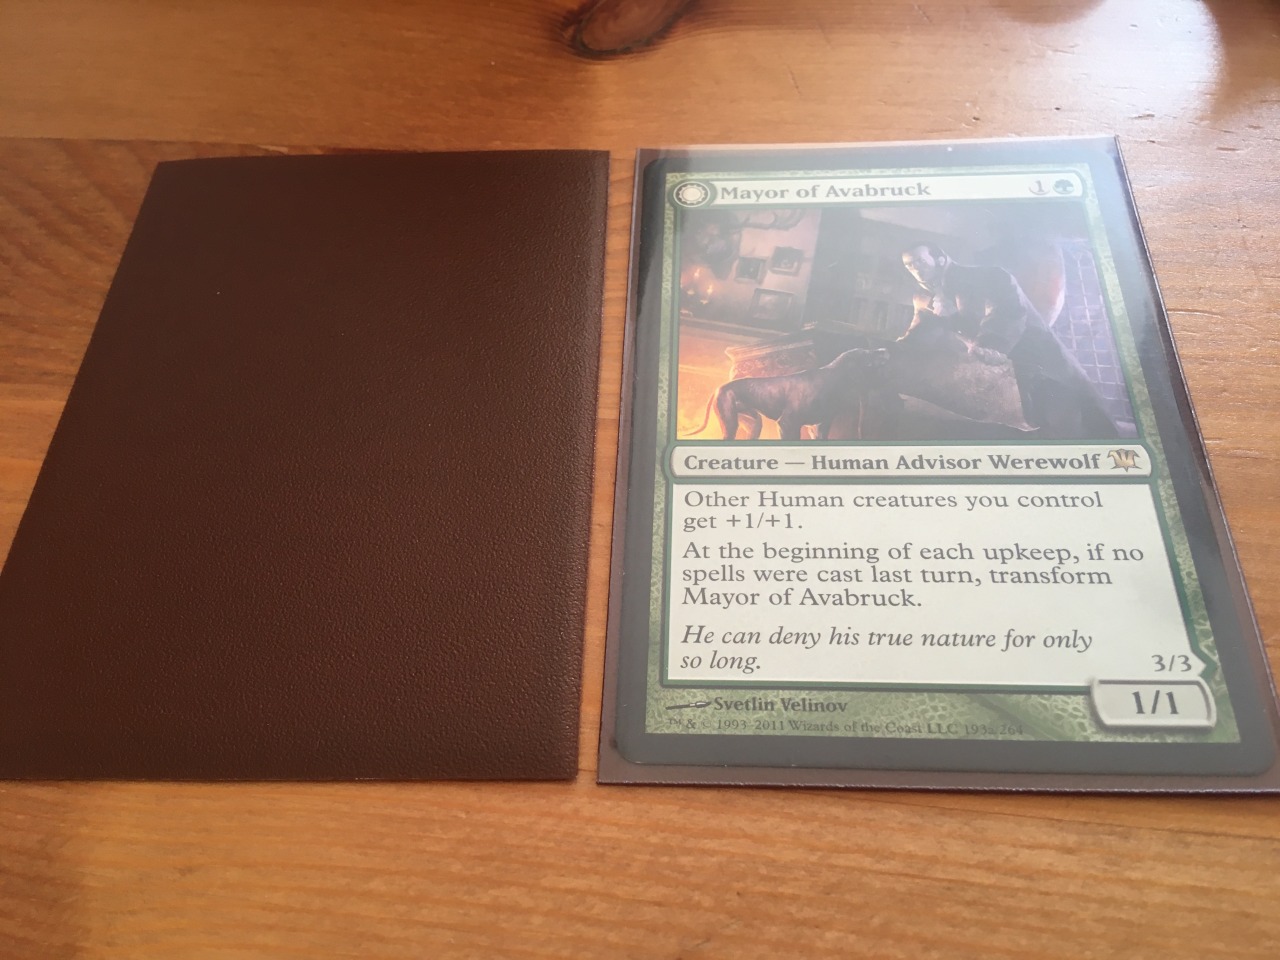 Perfect fit sleeves - Double Sleeve your cards to protect them!